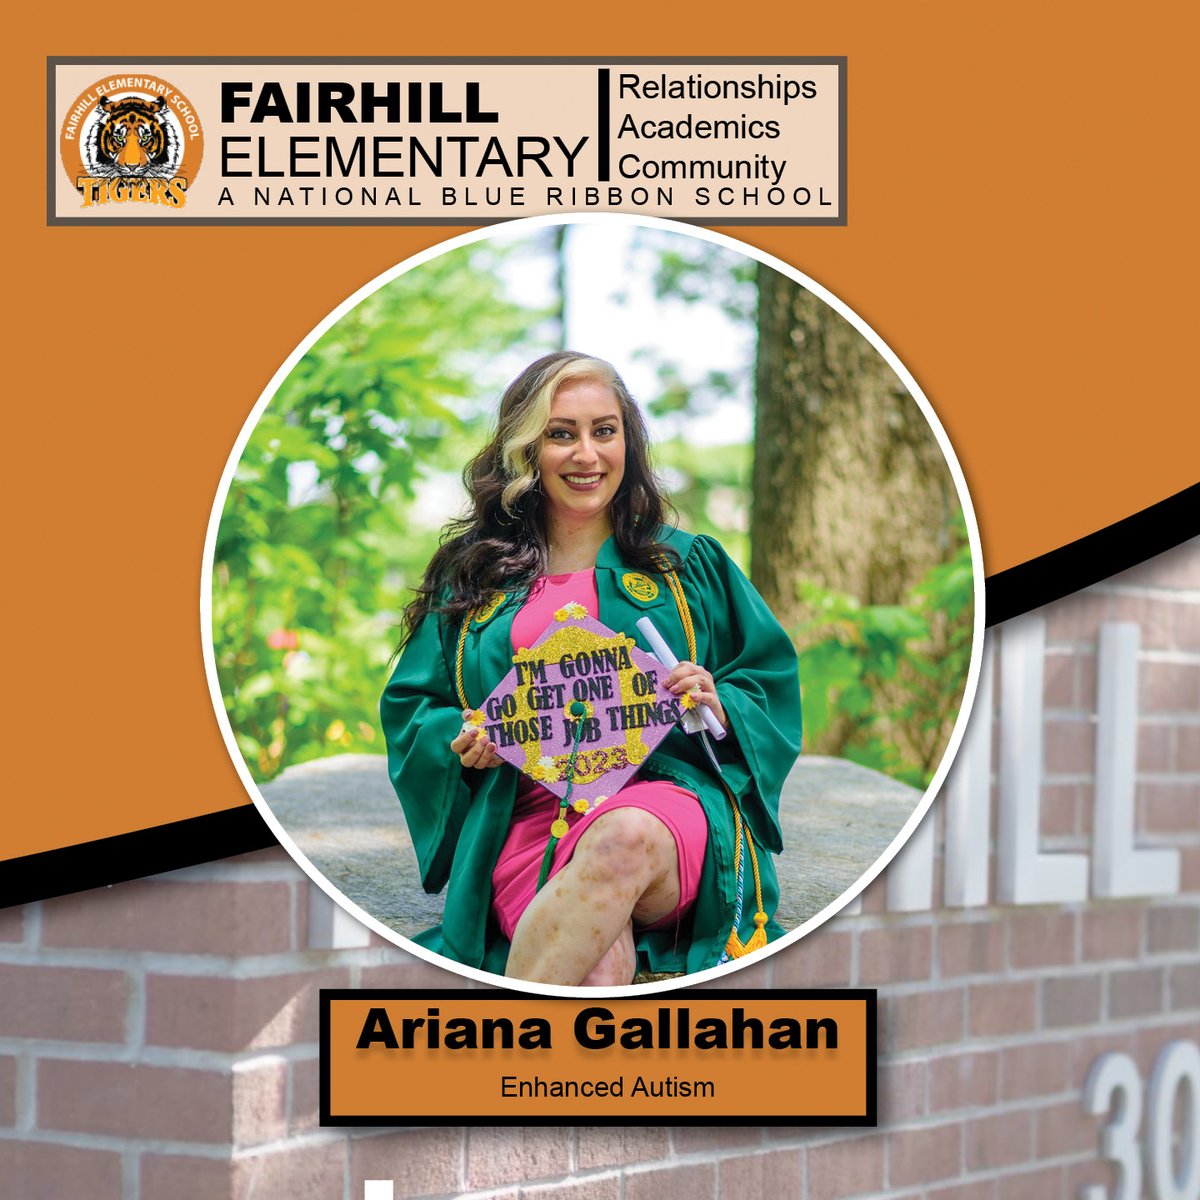 Meet Ms. Gallahan! She enjoys reading, lounging around with her dogs, and going to the gym. If she really enjoys a book, she'll get completely lost in it. What book recommendations do you have for Ms. Gallahan? #fcps #YouBelongAtFairhill